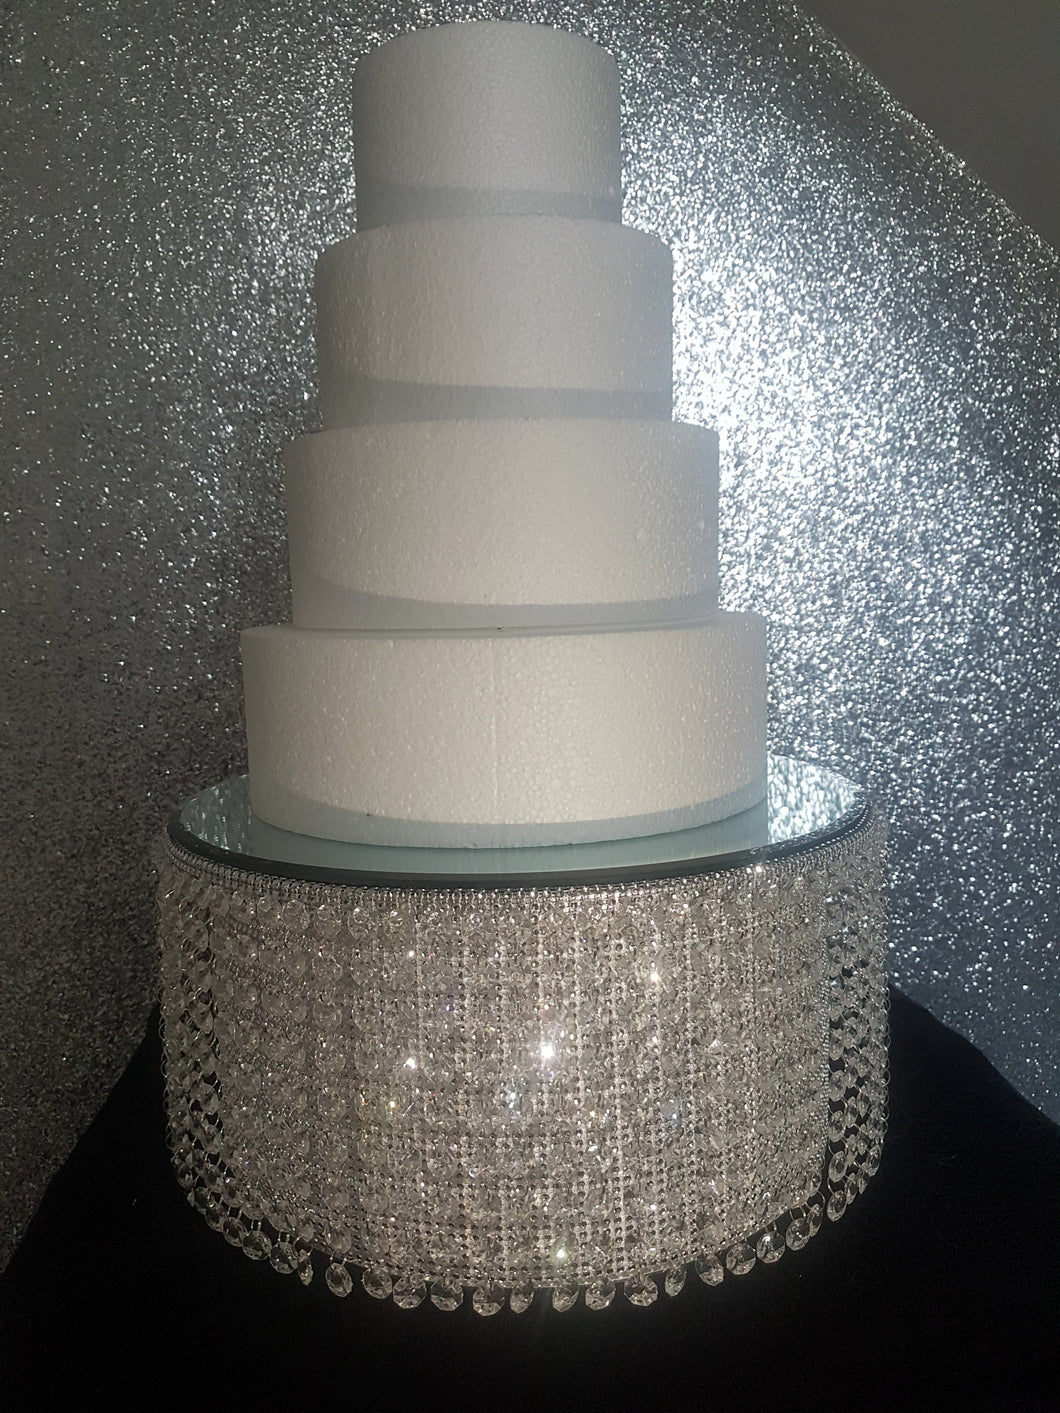 Crystal effect STATEMENT cake stand,  Crystal wedding cake stand - 7